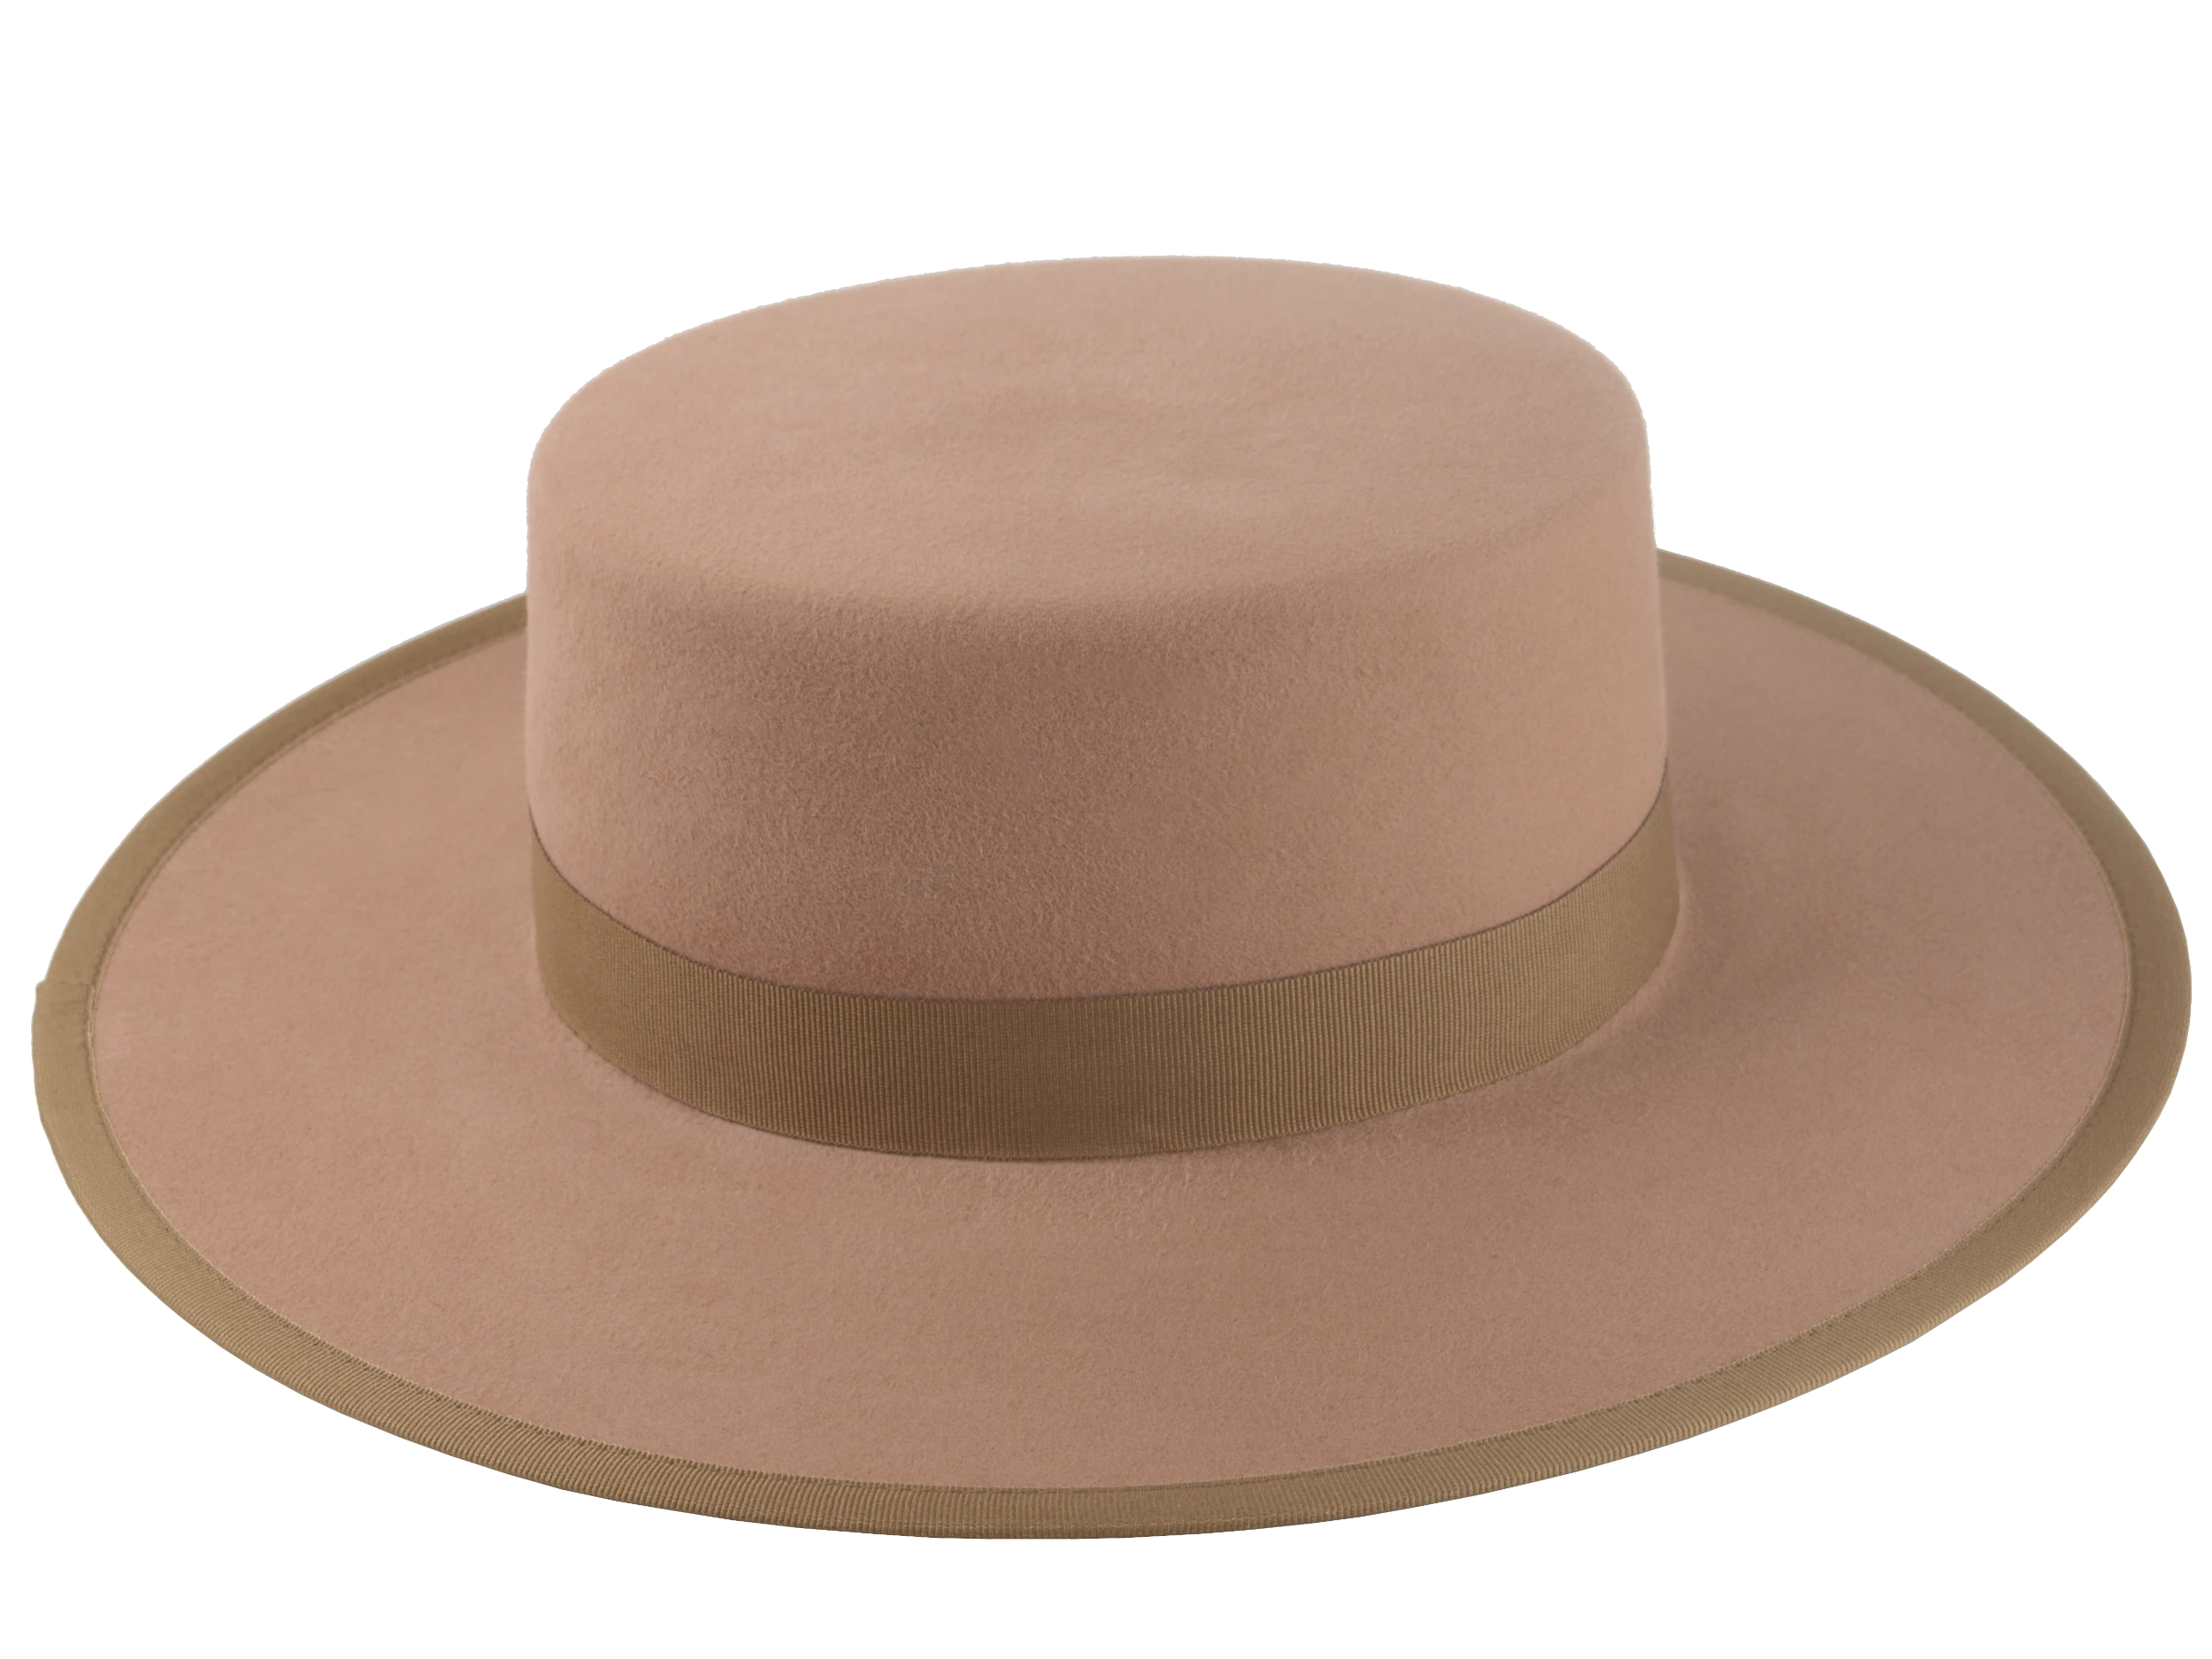 The Gaucho: Side-angle showcasing the depth of the crown and straightness of the flat brim | Agnoulita Hats